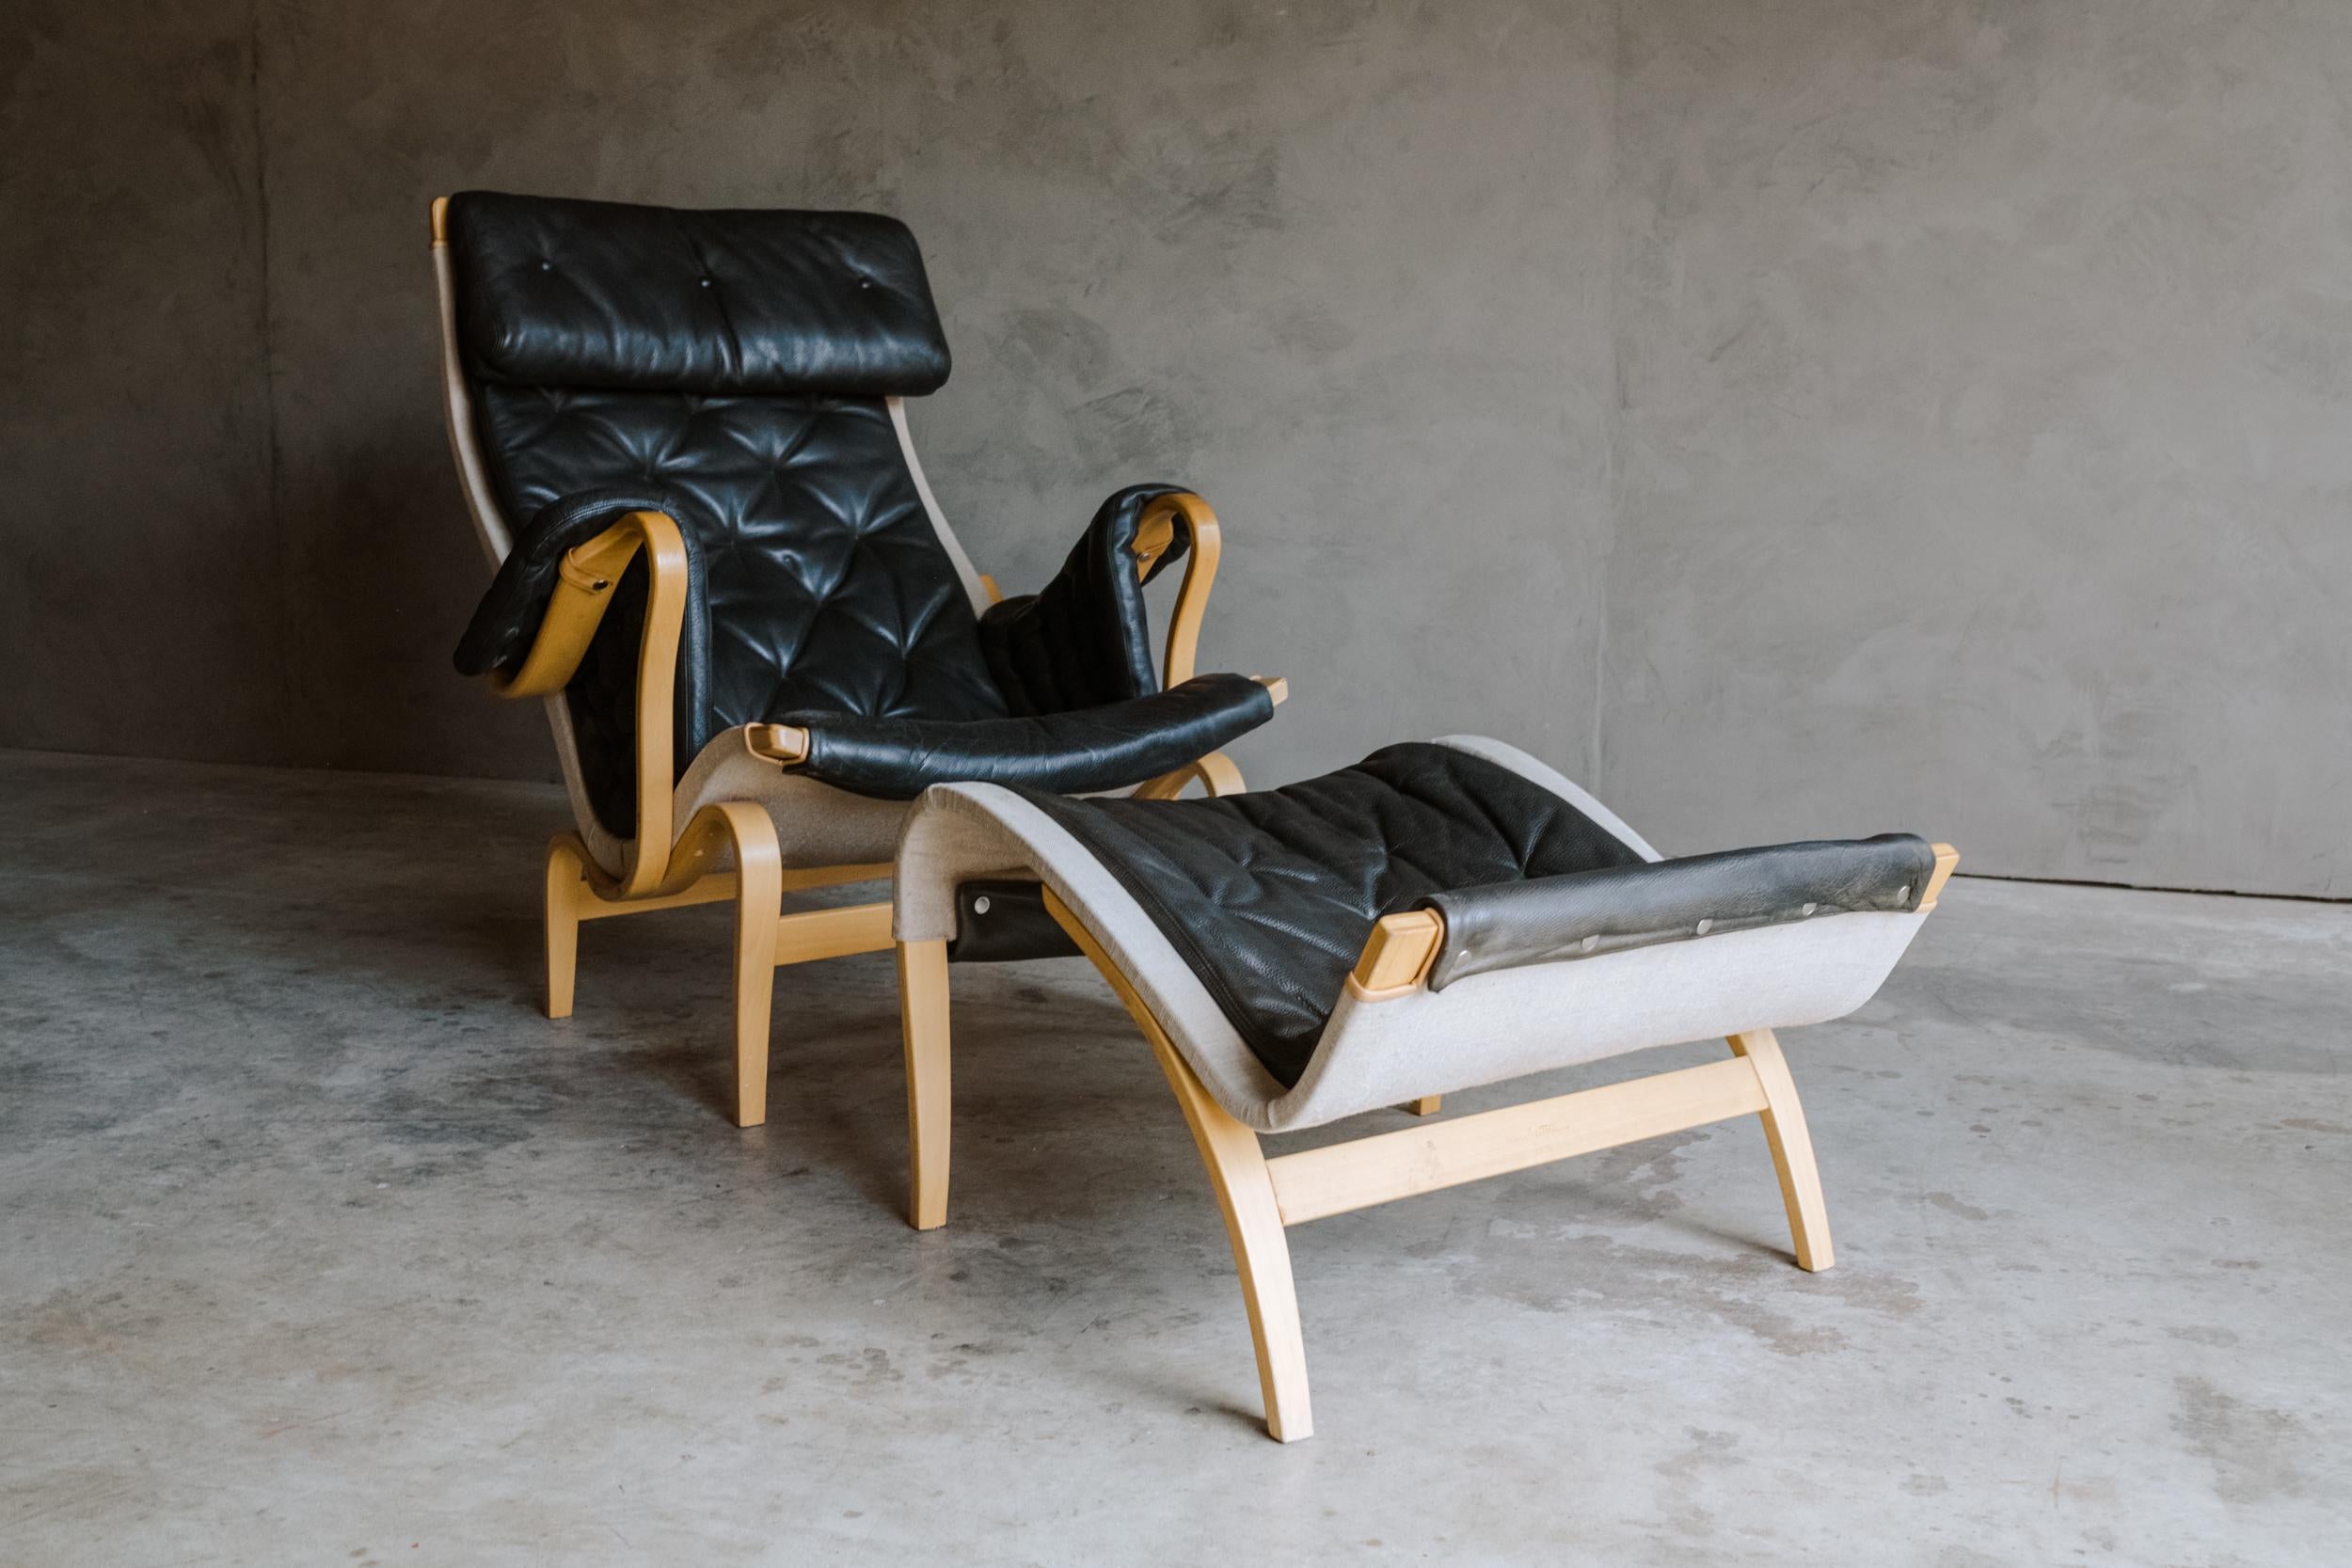 Vintage Bruno Mathsson lounge chair with ottoman, model Pernilla, circa 1970. Original black leather upholstery with very light wear and use. Measures: Ottoman: H - 16 / W - 24.5 / D - 27.